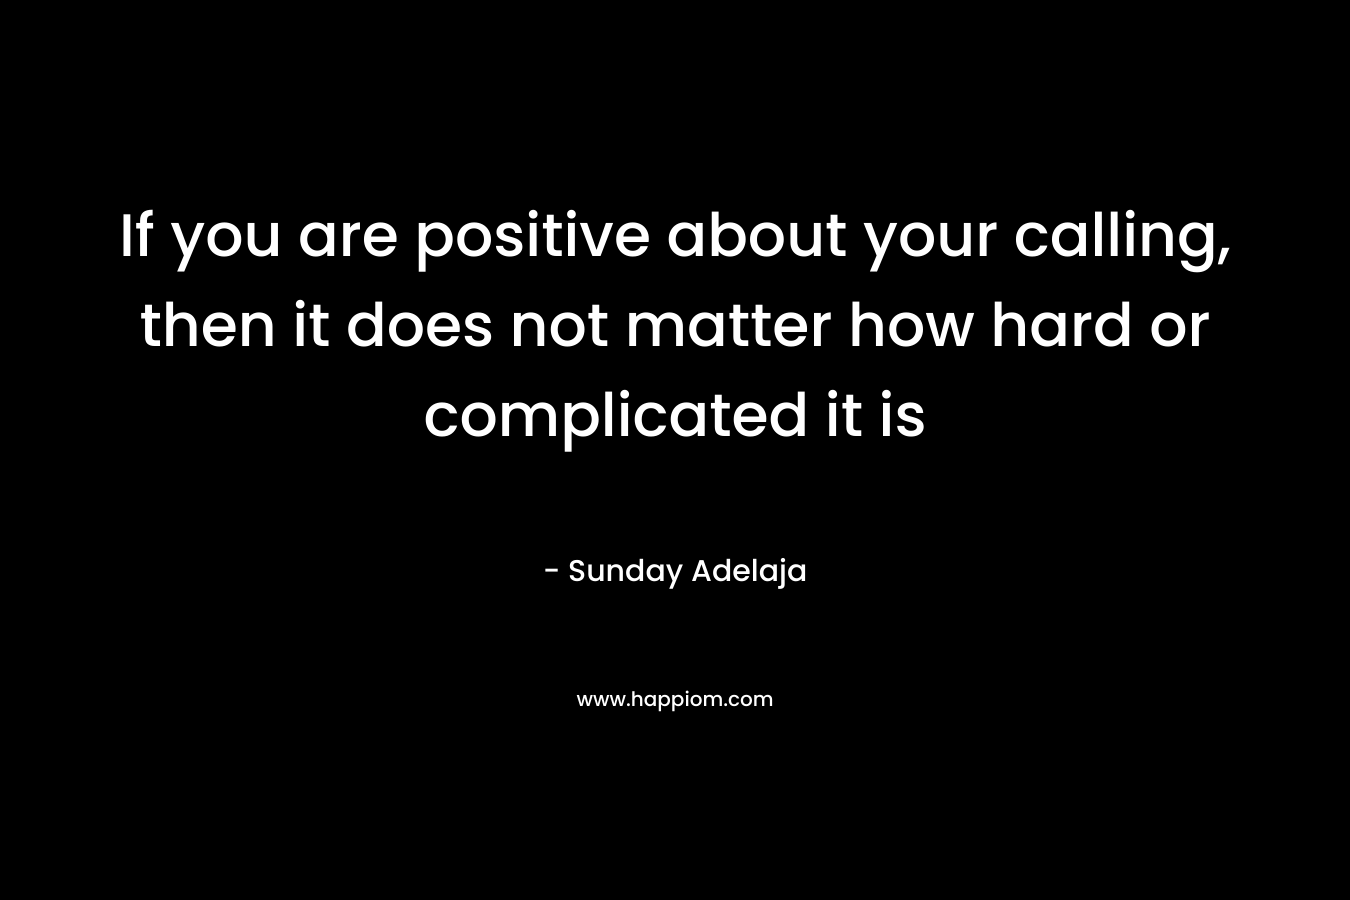 If you are positive about your calling, then it does not matter how hard or complicated it is